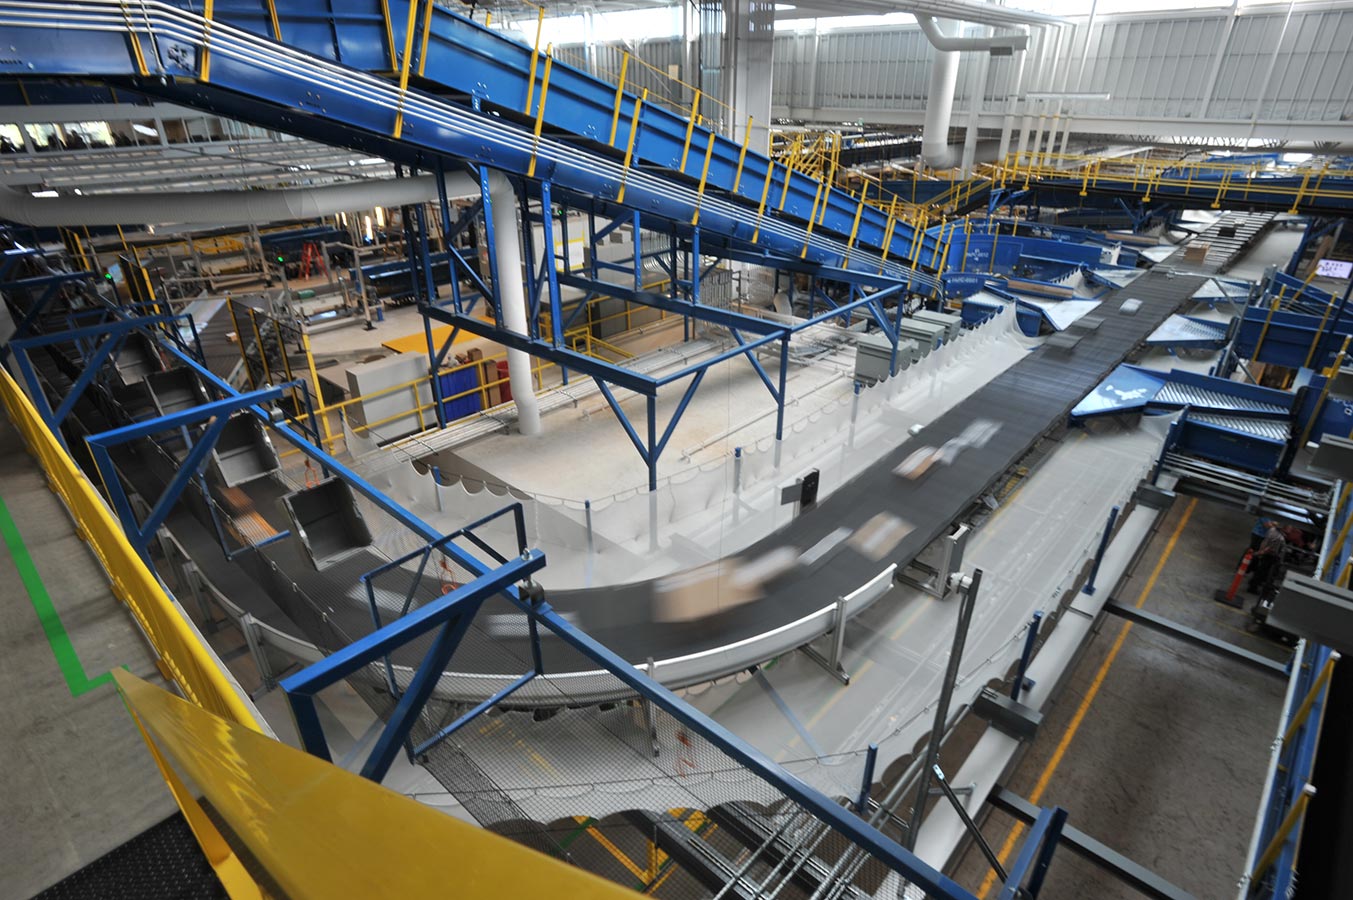 Interior view of a mail processing centre featuring a large conveyor belt